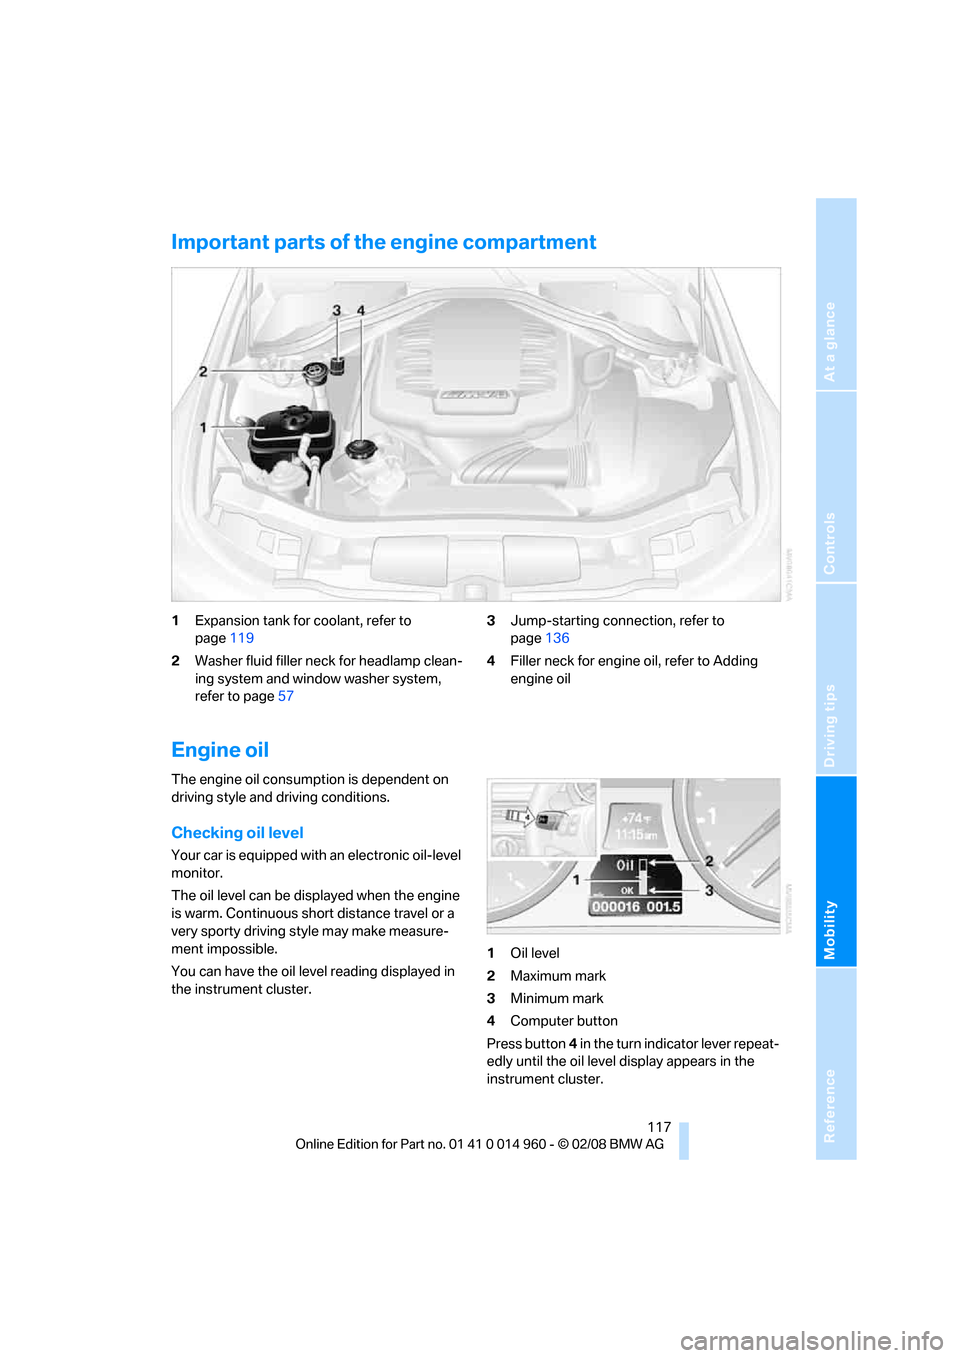 BMW M3 CONVERTIBLE 2008 E93 Service Manual Reference
At a glance
Controls
Driving tips
Mobility
 117
Important parts of the engine compartment
1Expansion tank for coolant, refer to 
page119
2Washer fluid filler neck for headlamp clean-
ing sys